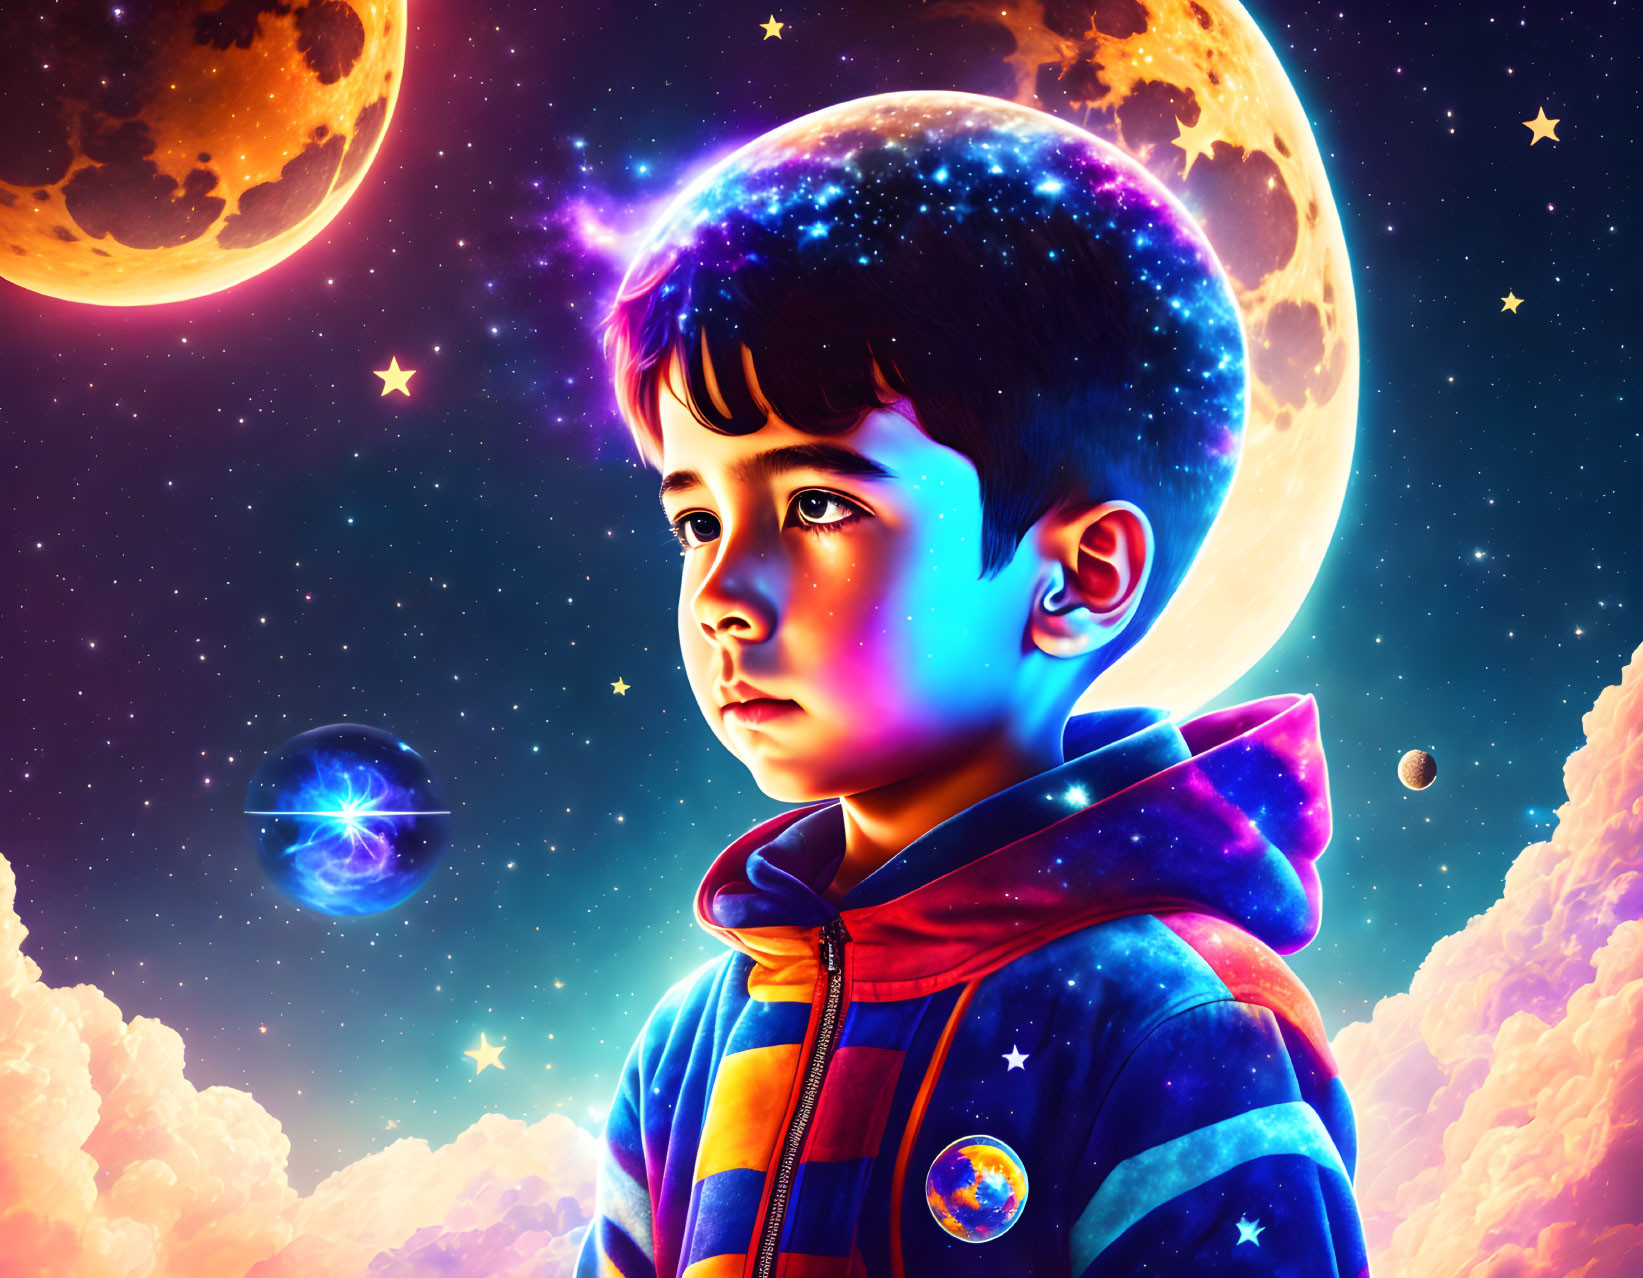 Child with thoughtful expression in cosmic scene with stars and planets